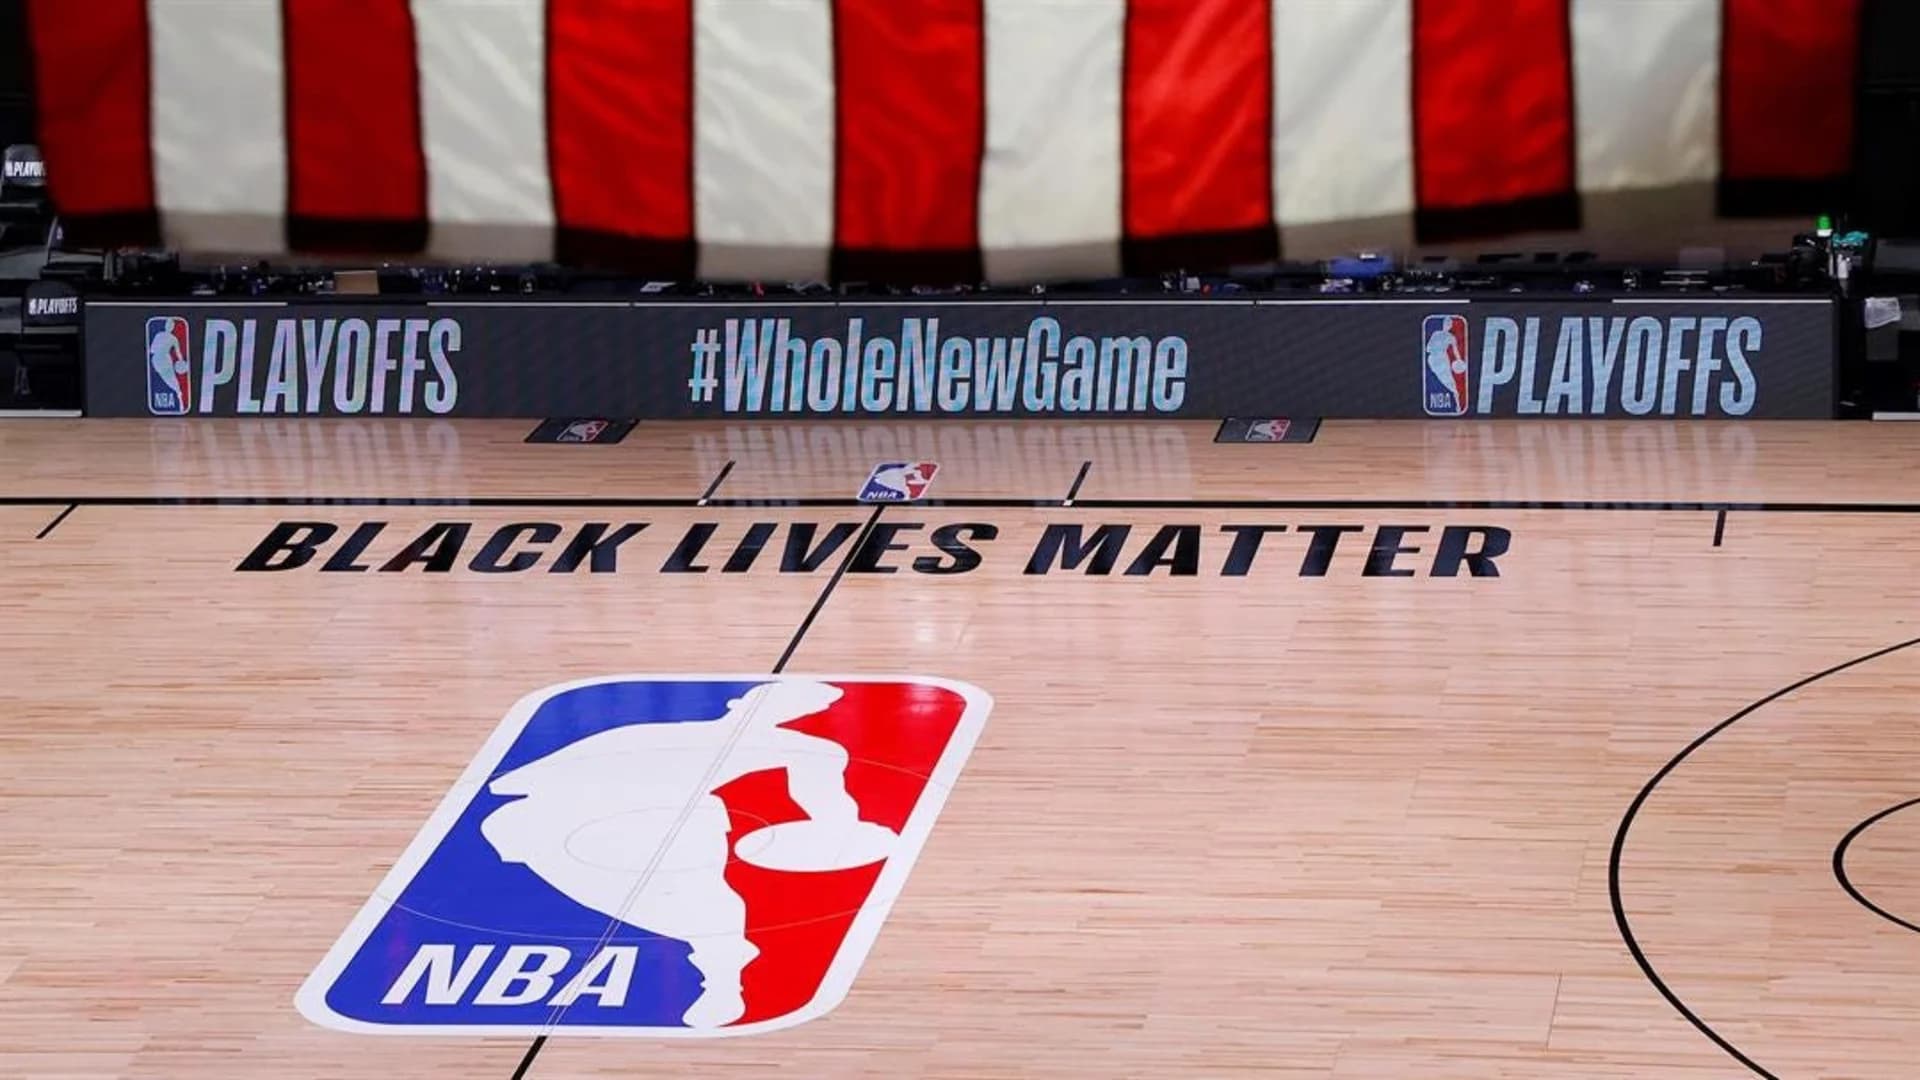 NBA arenas to be used as polling locations in agreement that lets playoffs resume Saturday